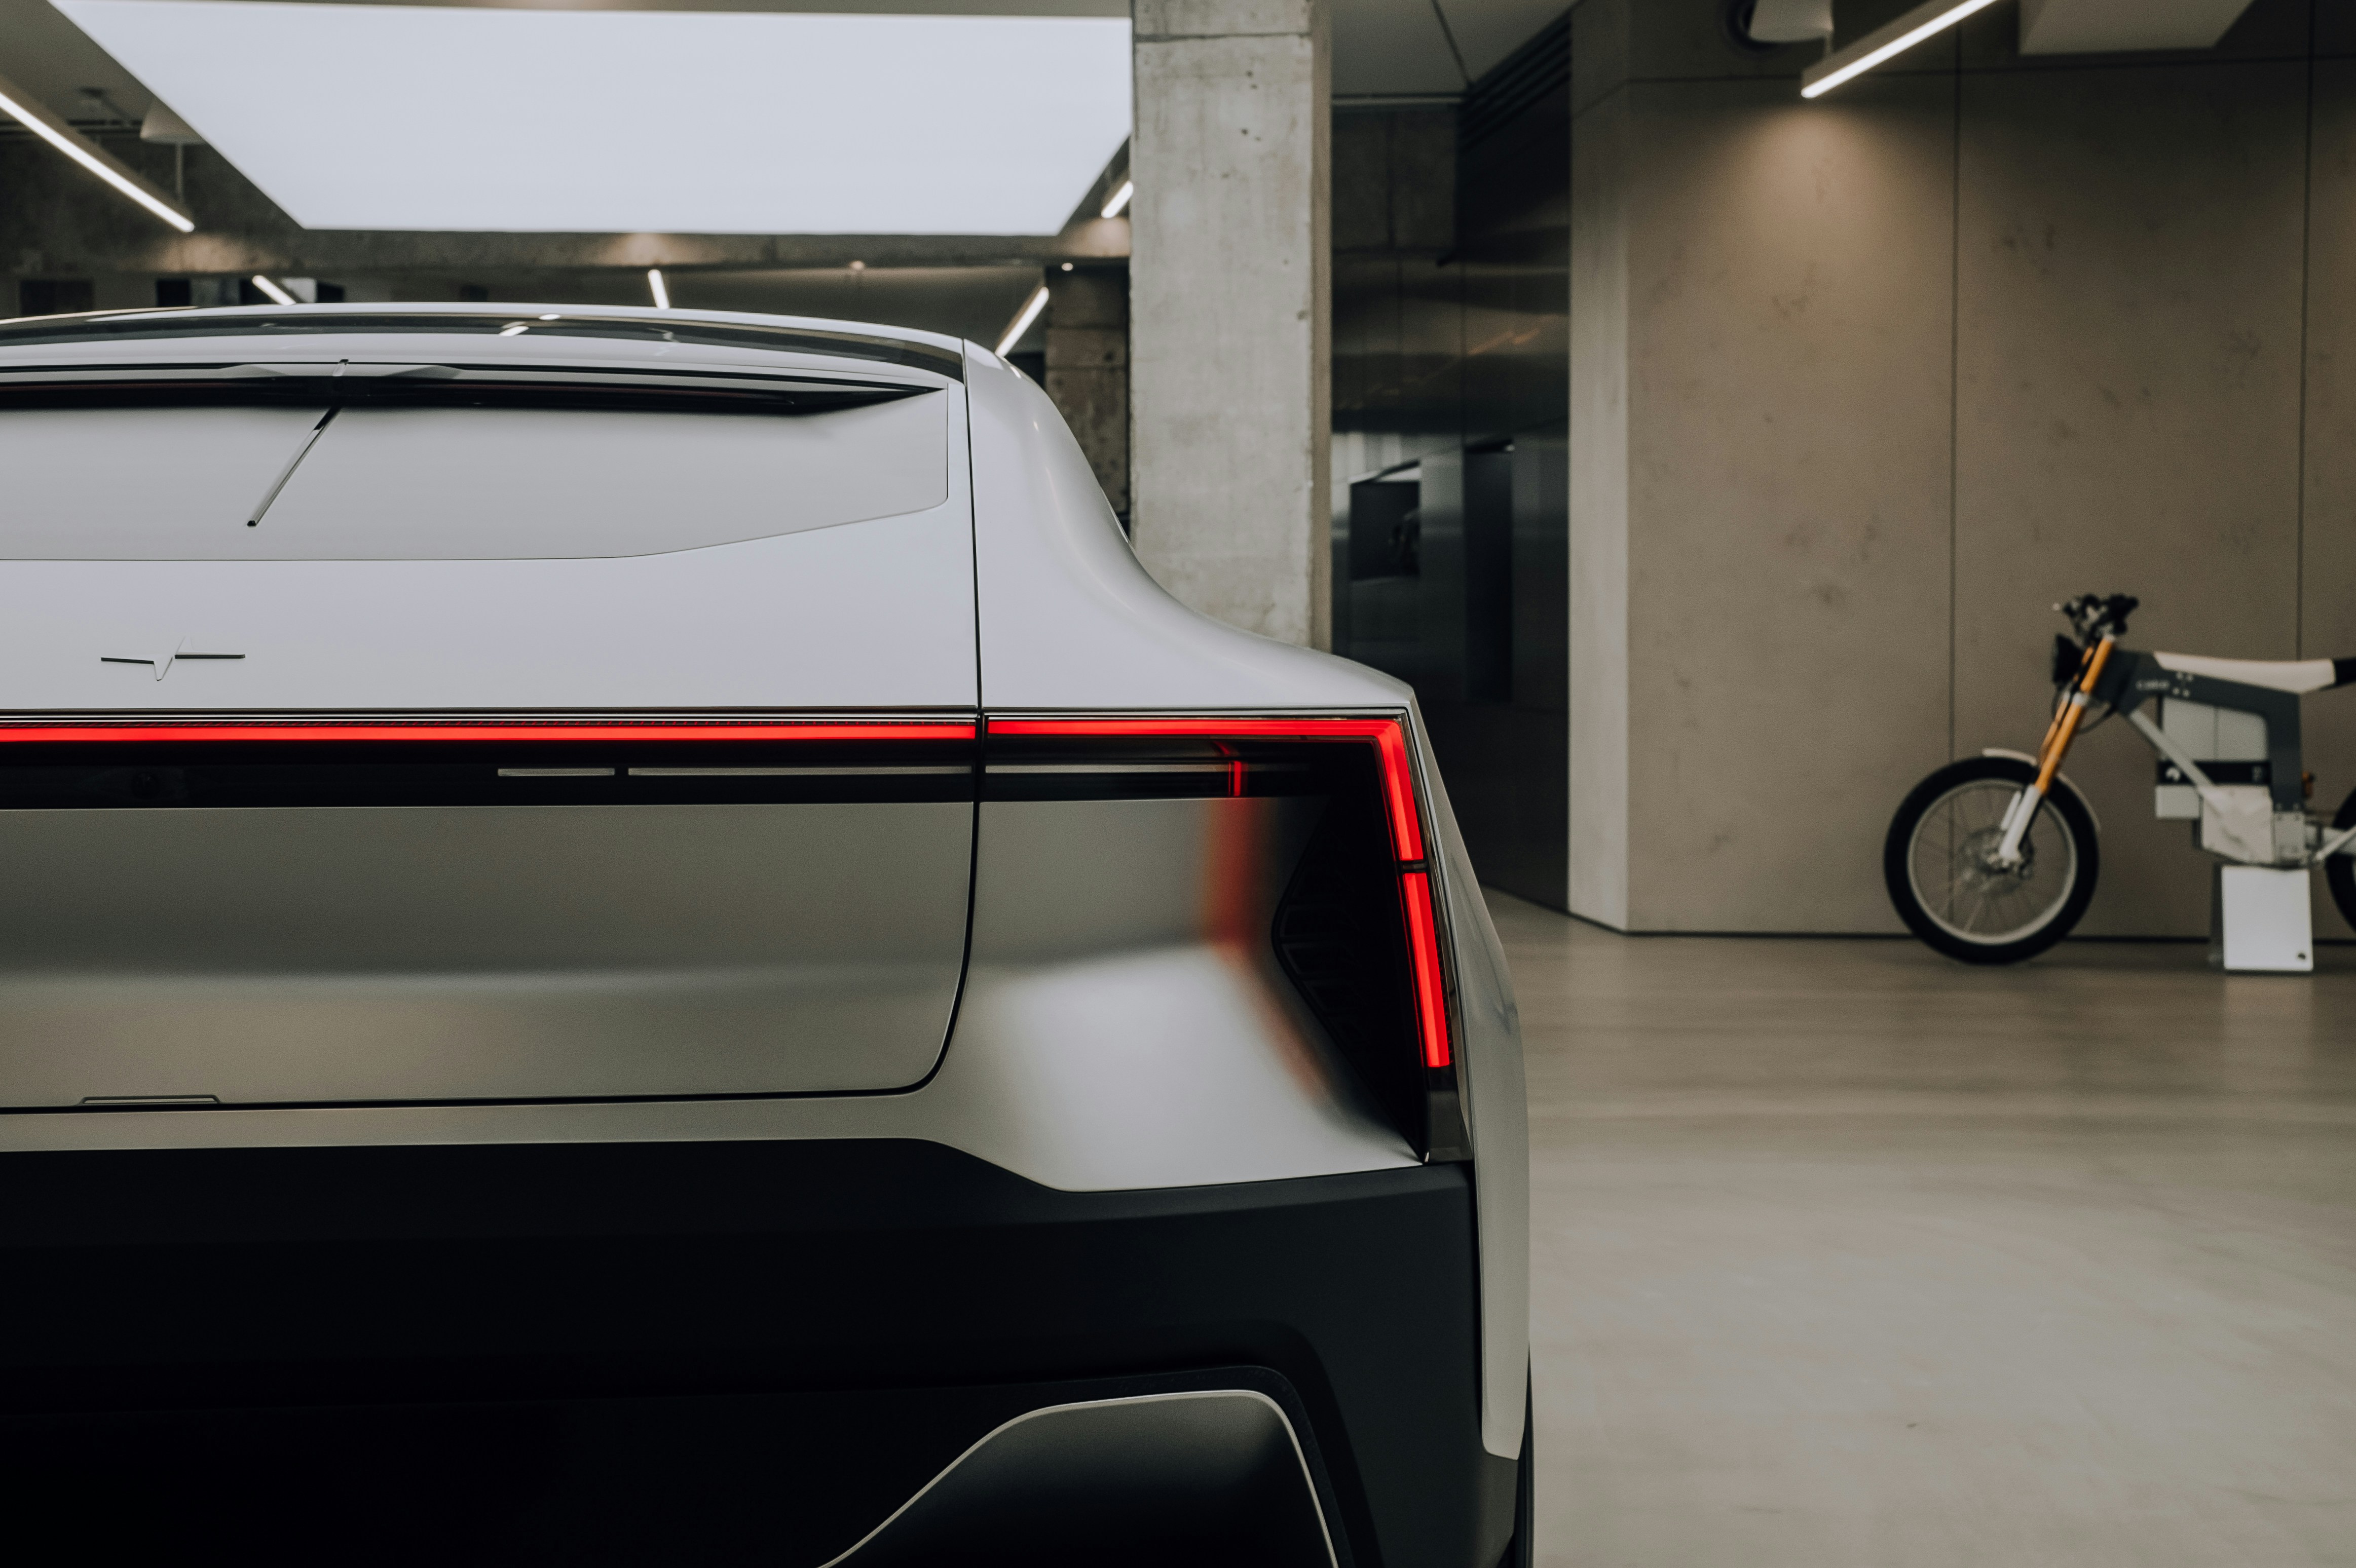 Polestar Precept - tight lines, futuristic design and so much space! Follow me on Instagram ( @Kenny.leys ) for more of my adventures!